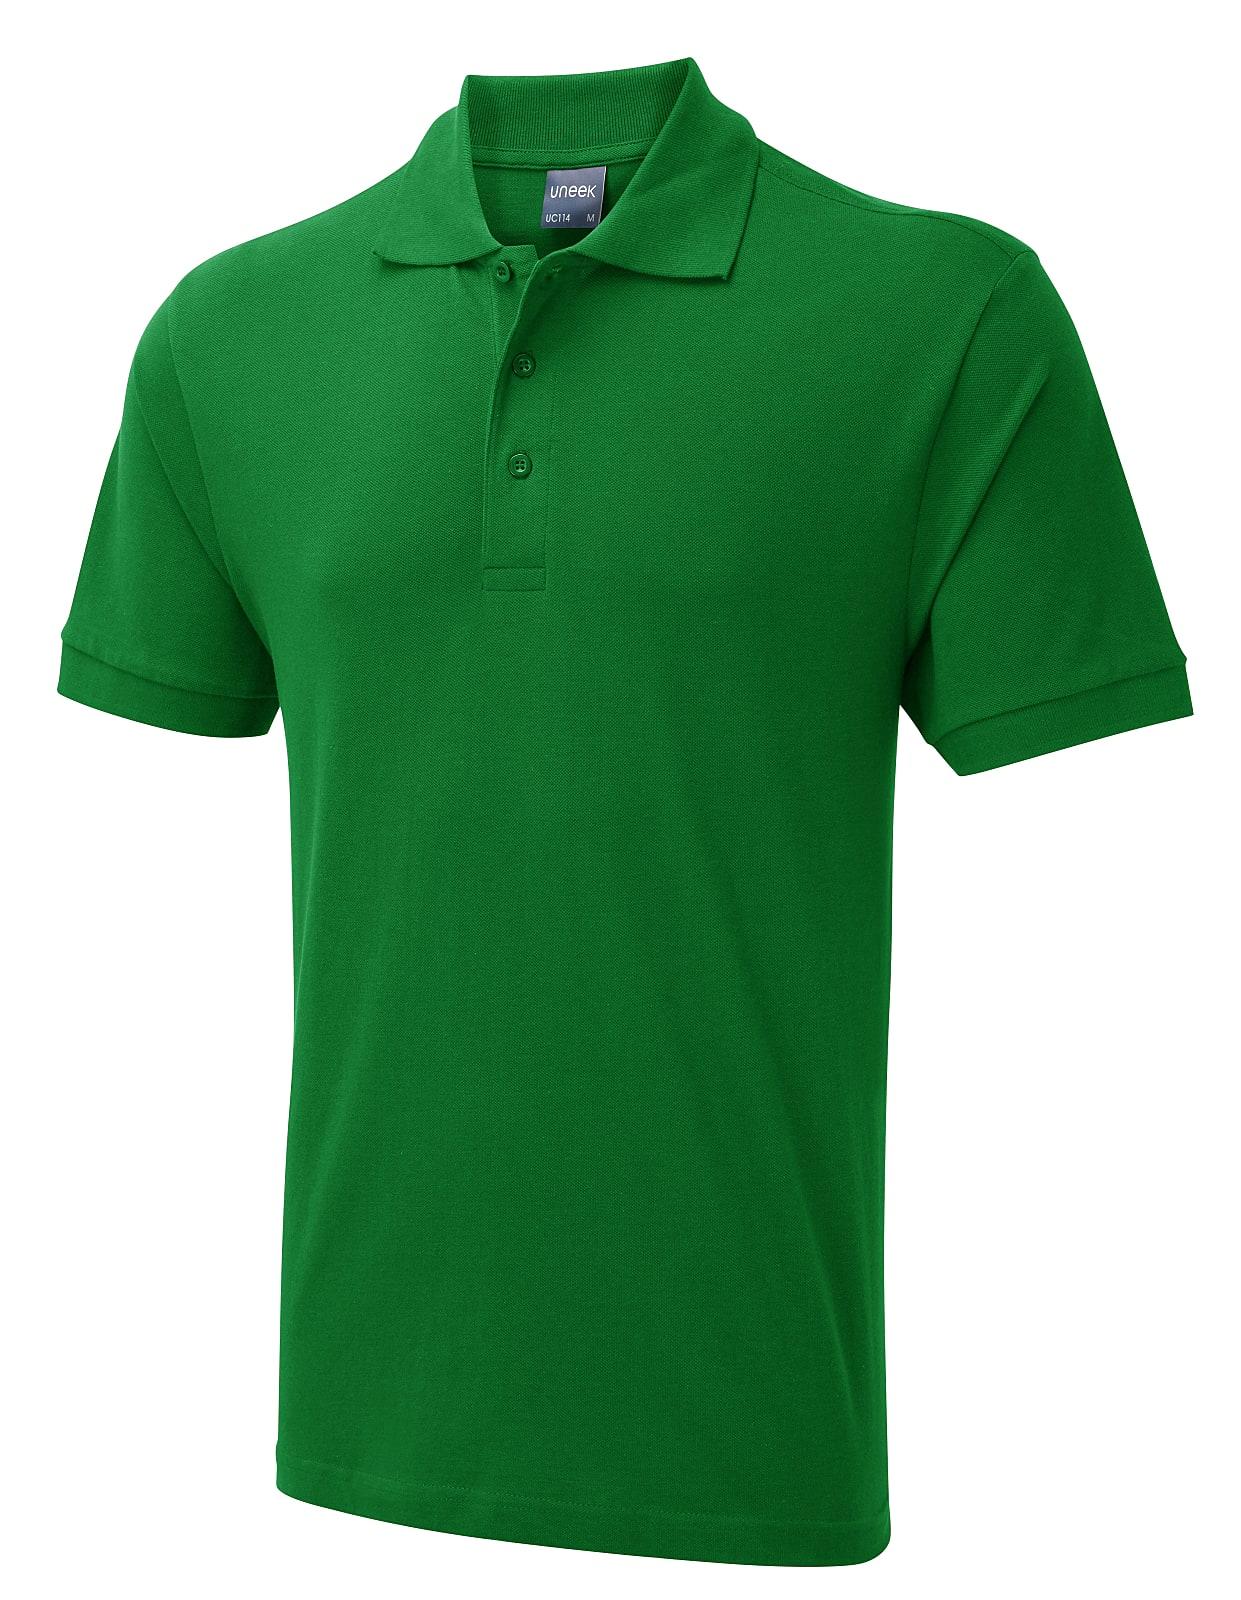 Uneek 180GSM Mens Polo Shirt in Kelly Green (Product Code: UC114)